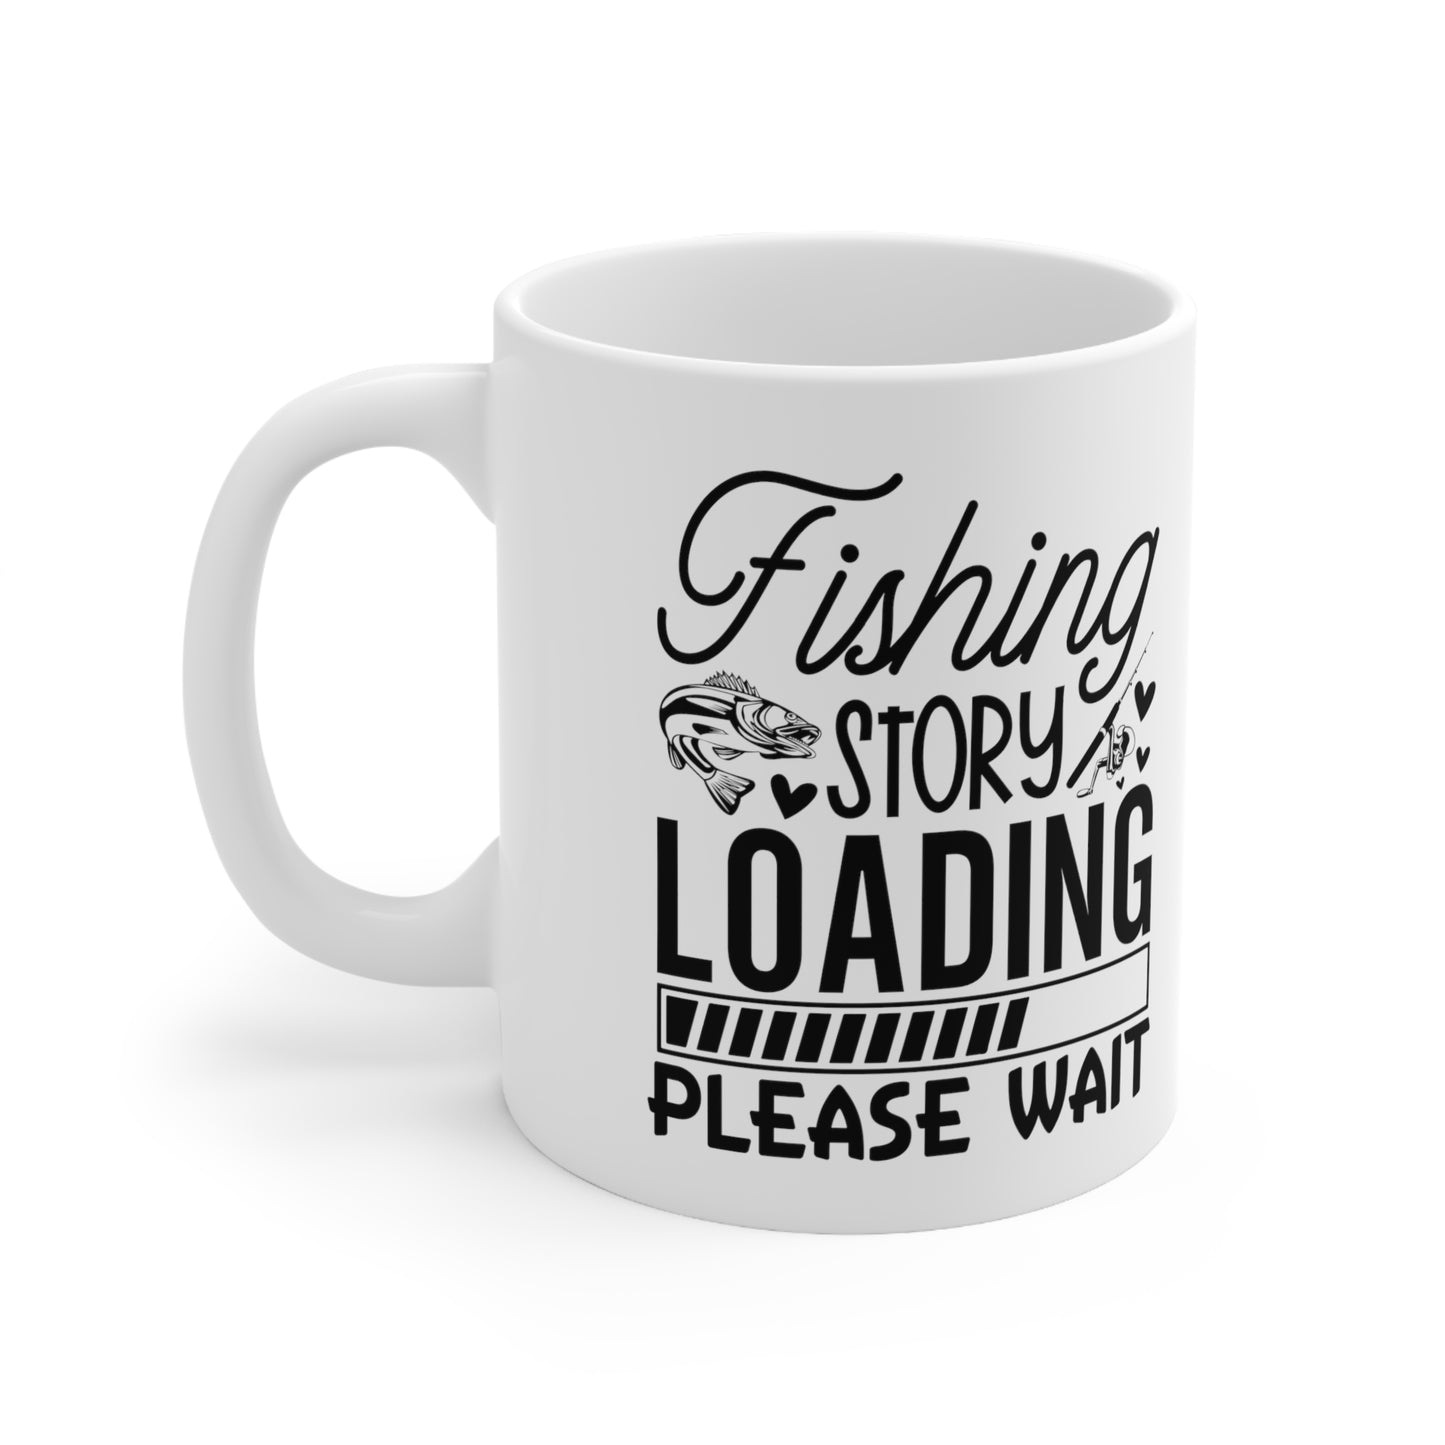 "Fishing Story Loading....Please Wait" Coffee Mug - Weave Got Gifts - Unique Gifts You Won’t Find Anywhere Else!